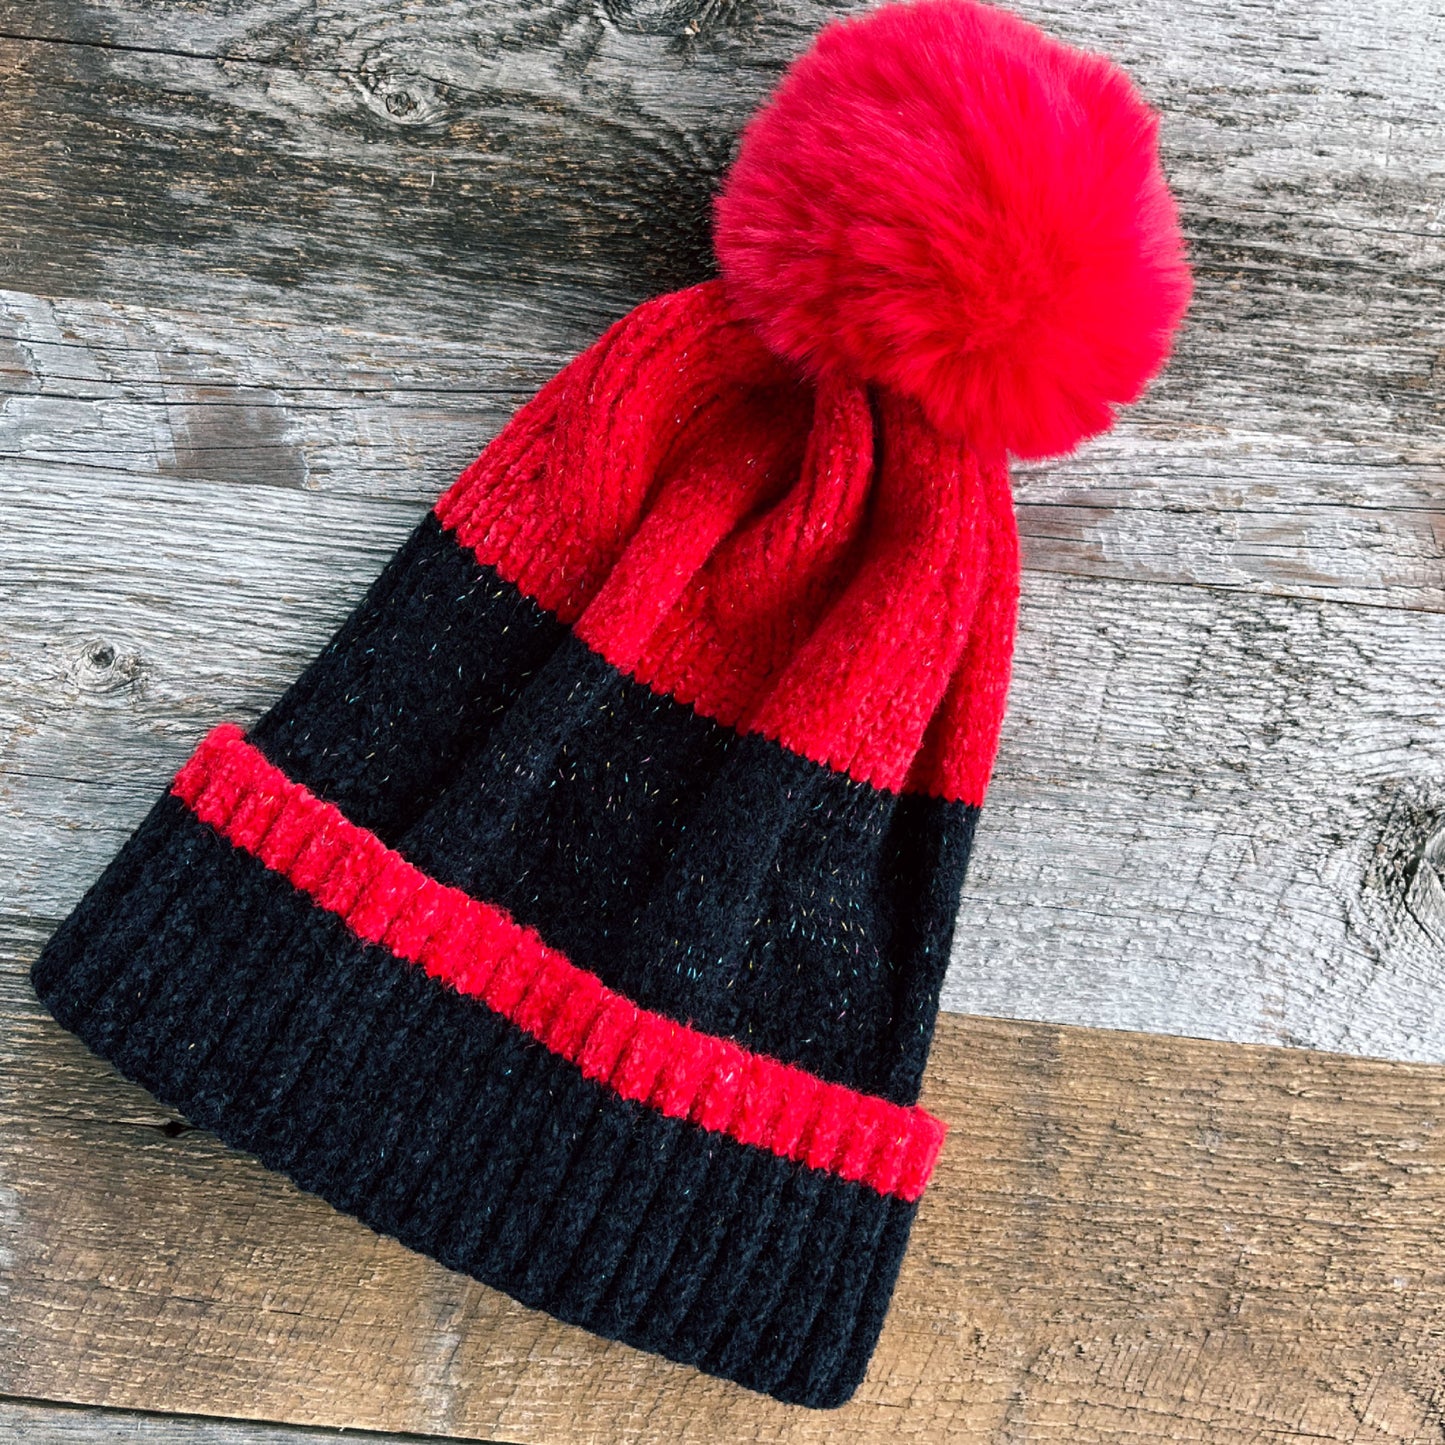 RED AND BLACK KNIT BEANIE